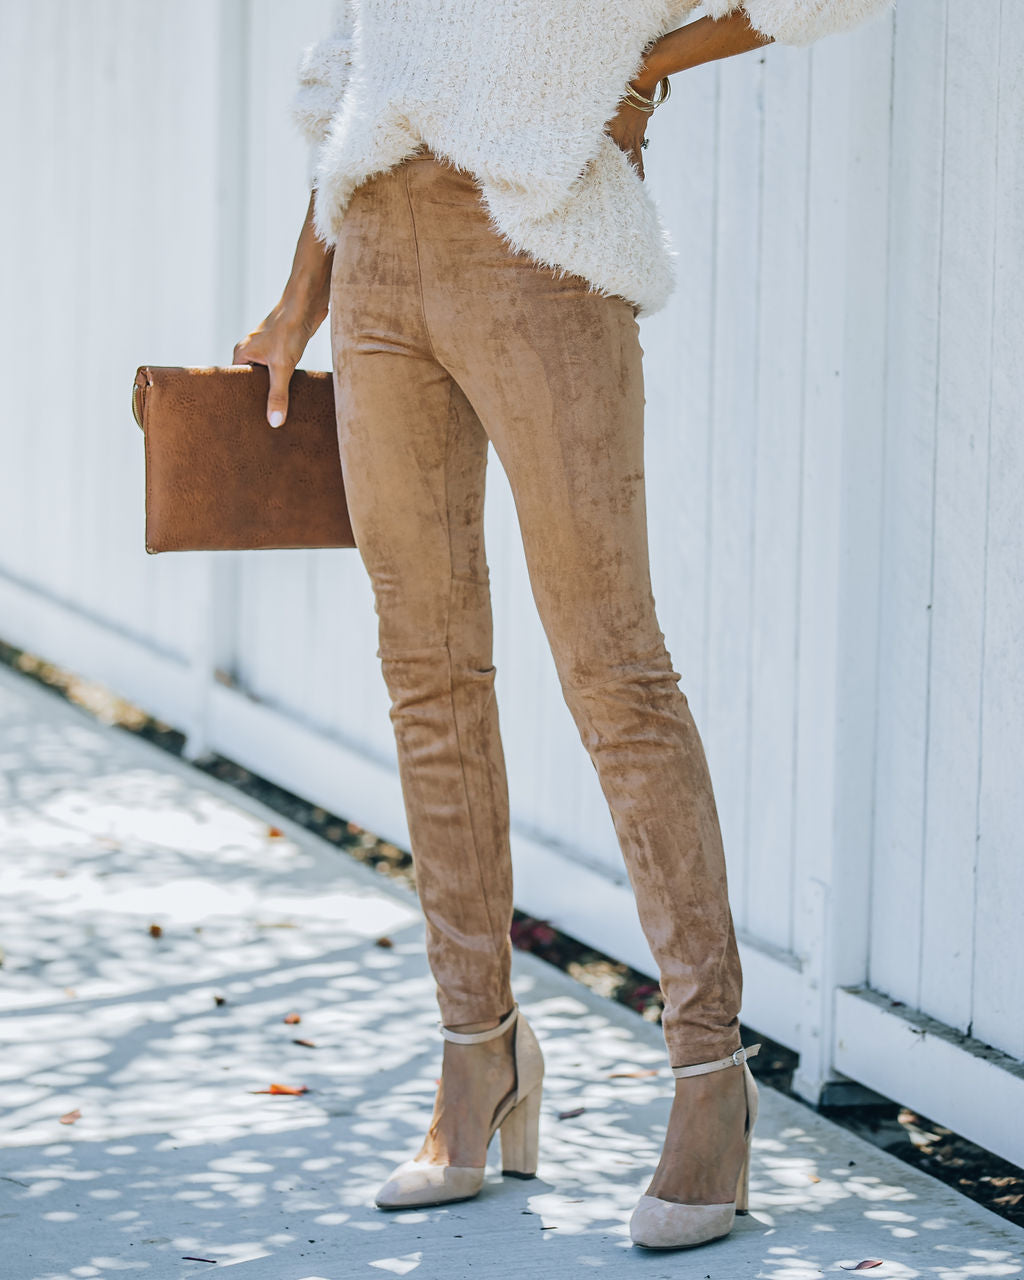 The Suede Leggings You Need This Fall